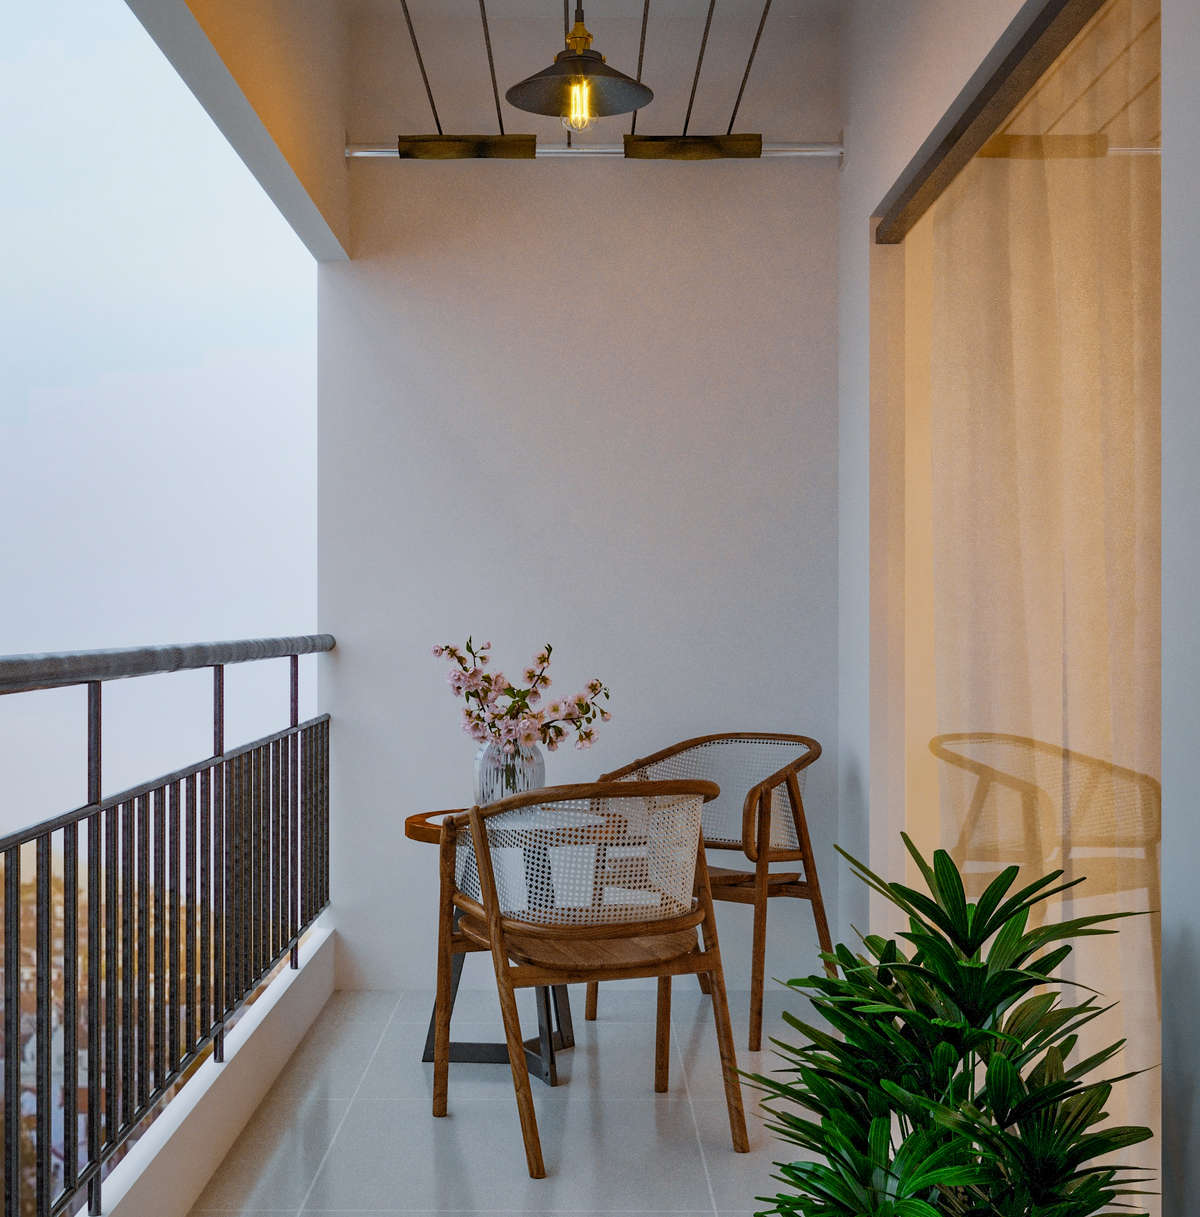 cool white balcony. peaceful balcony gives peaceful morning & Evening.

#sthaayi_design_lab #sthaayi
#balcony #white #chair #morning #evening #vibes #cool #colors.